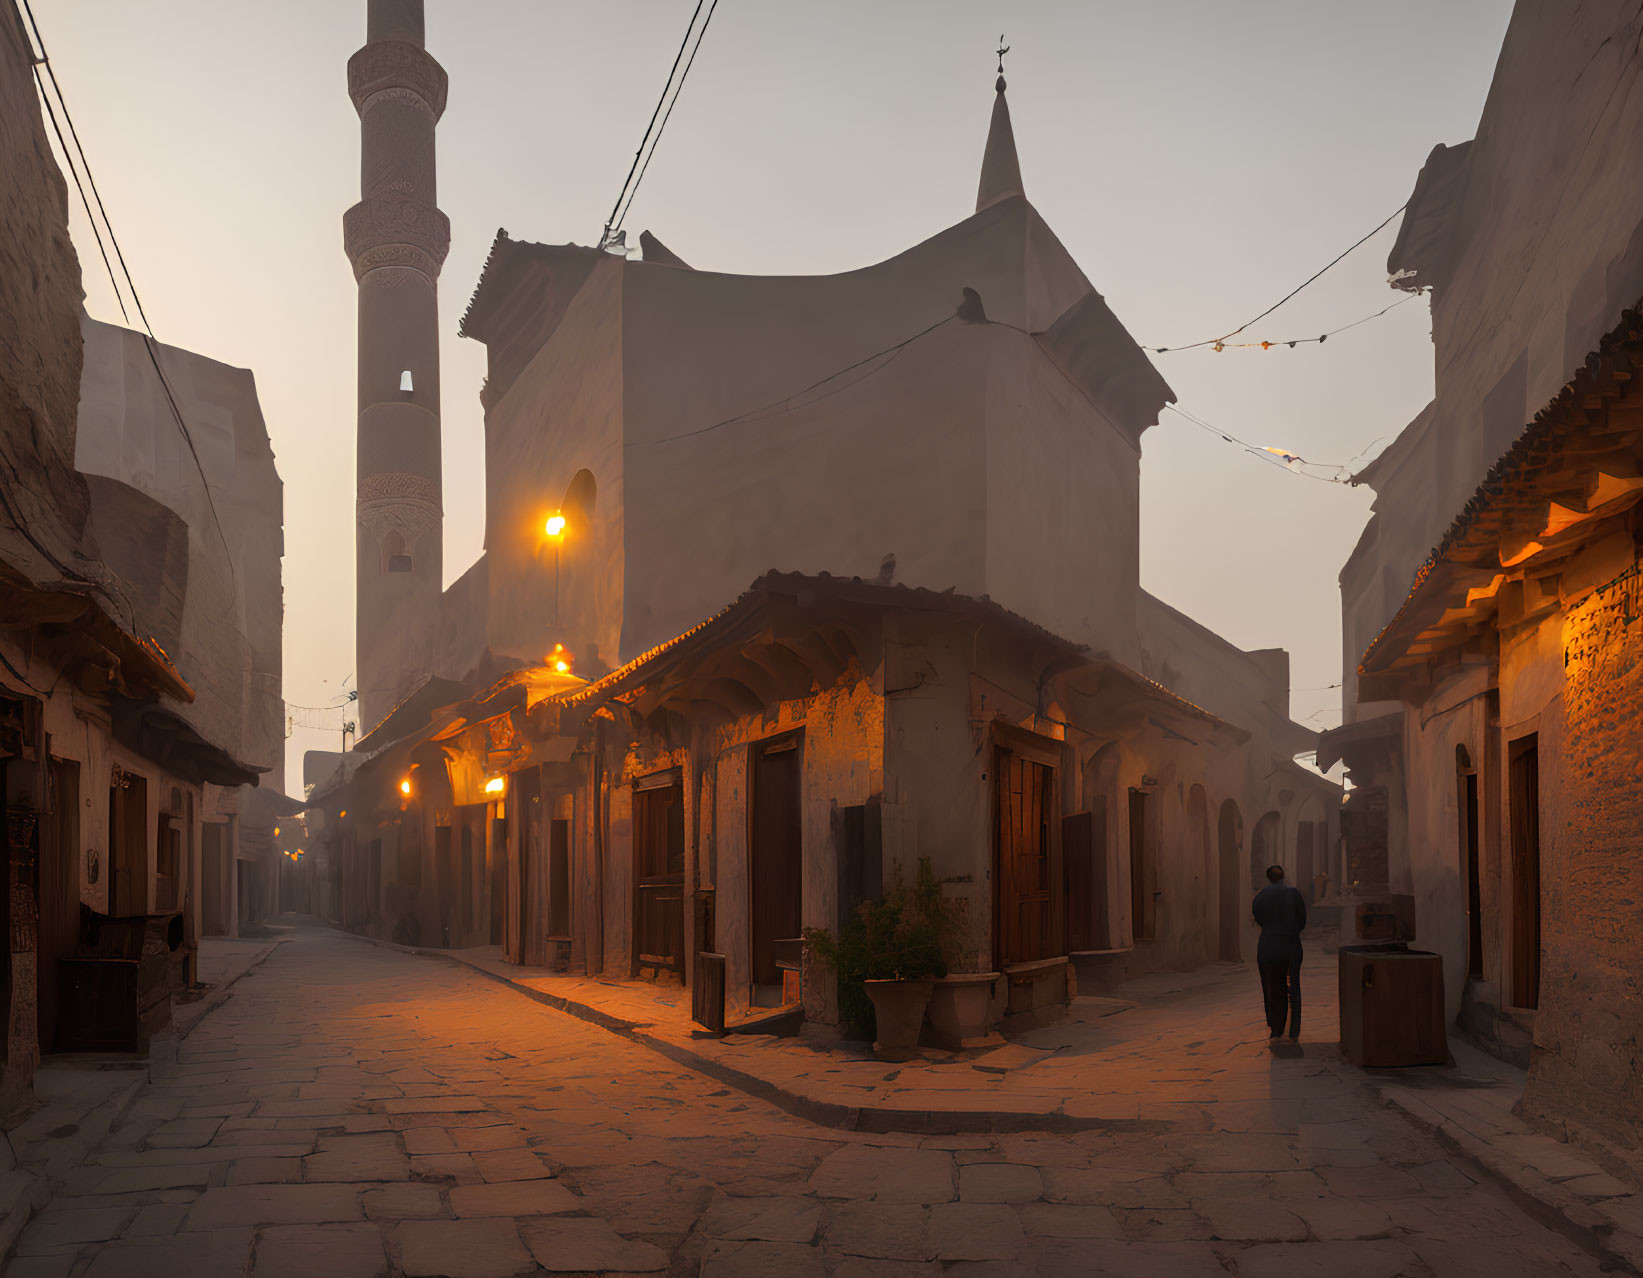 Historic architecture and minaret in tranquil street scene at dawn or dusk